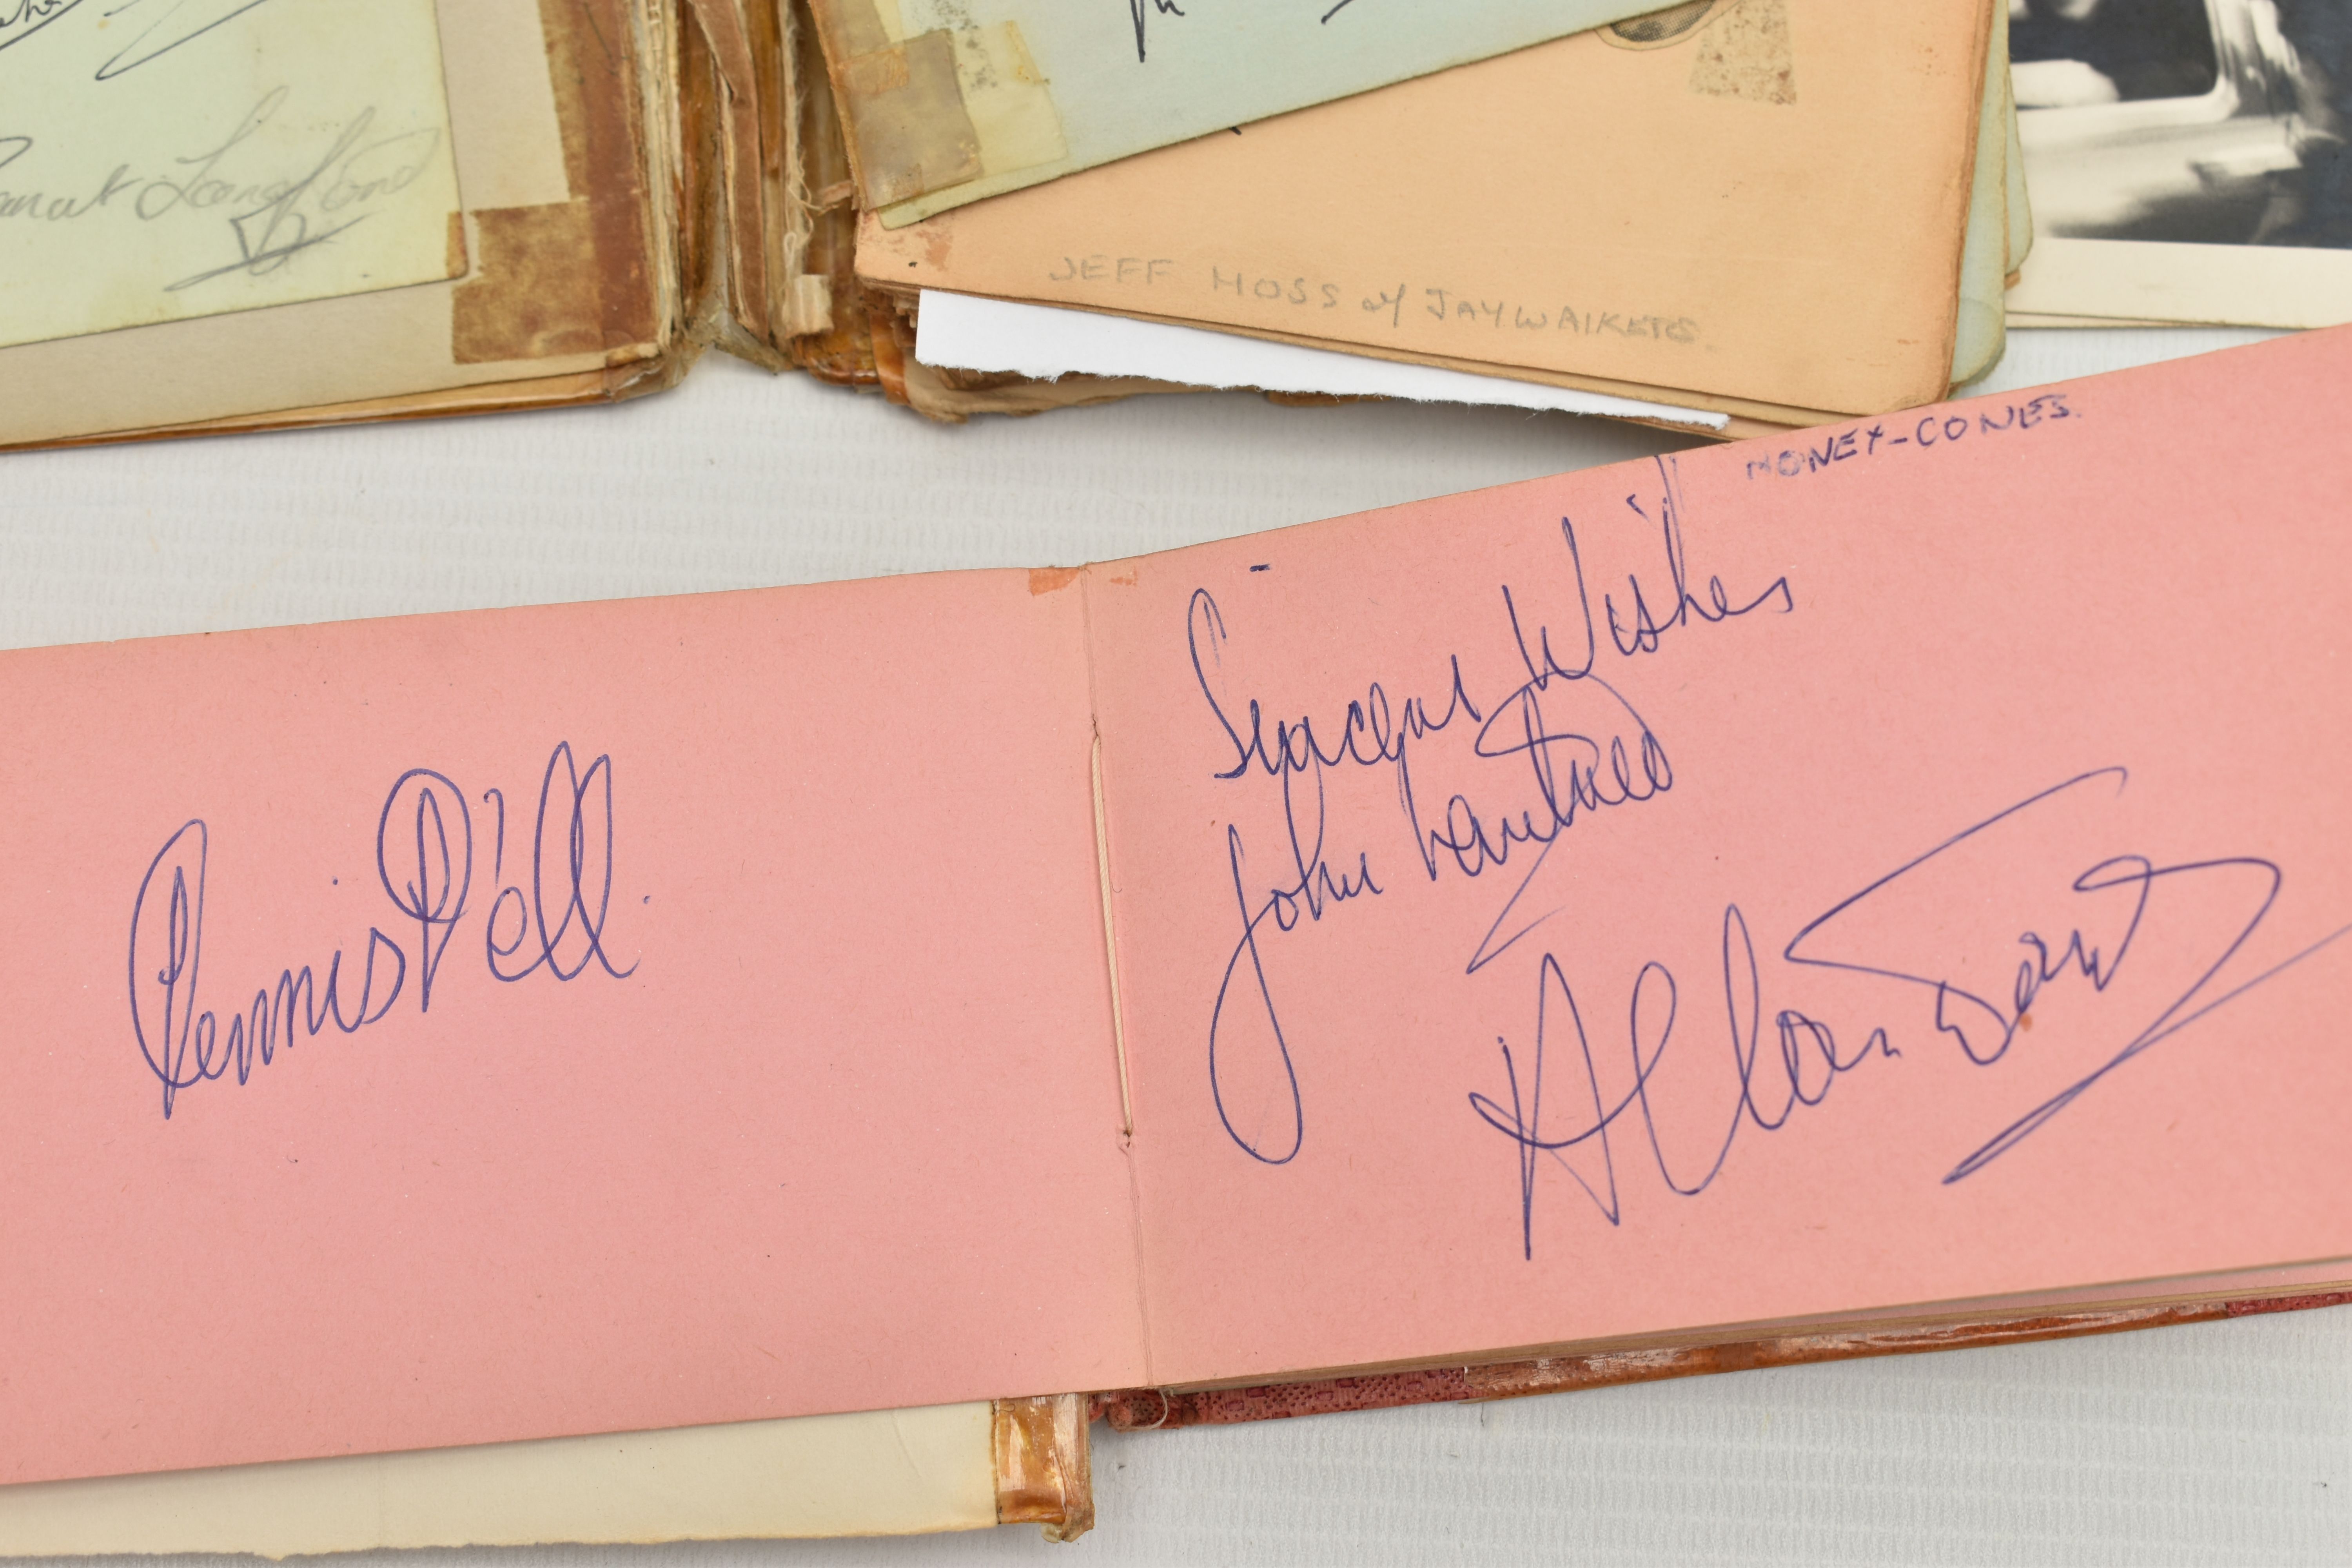 THE BEATLES AUTOGRAPHS, two autograph albums and two photographs, the Woburn Abbey autograph book is - Image 5 of 22